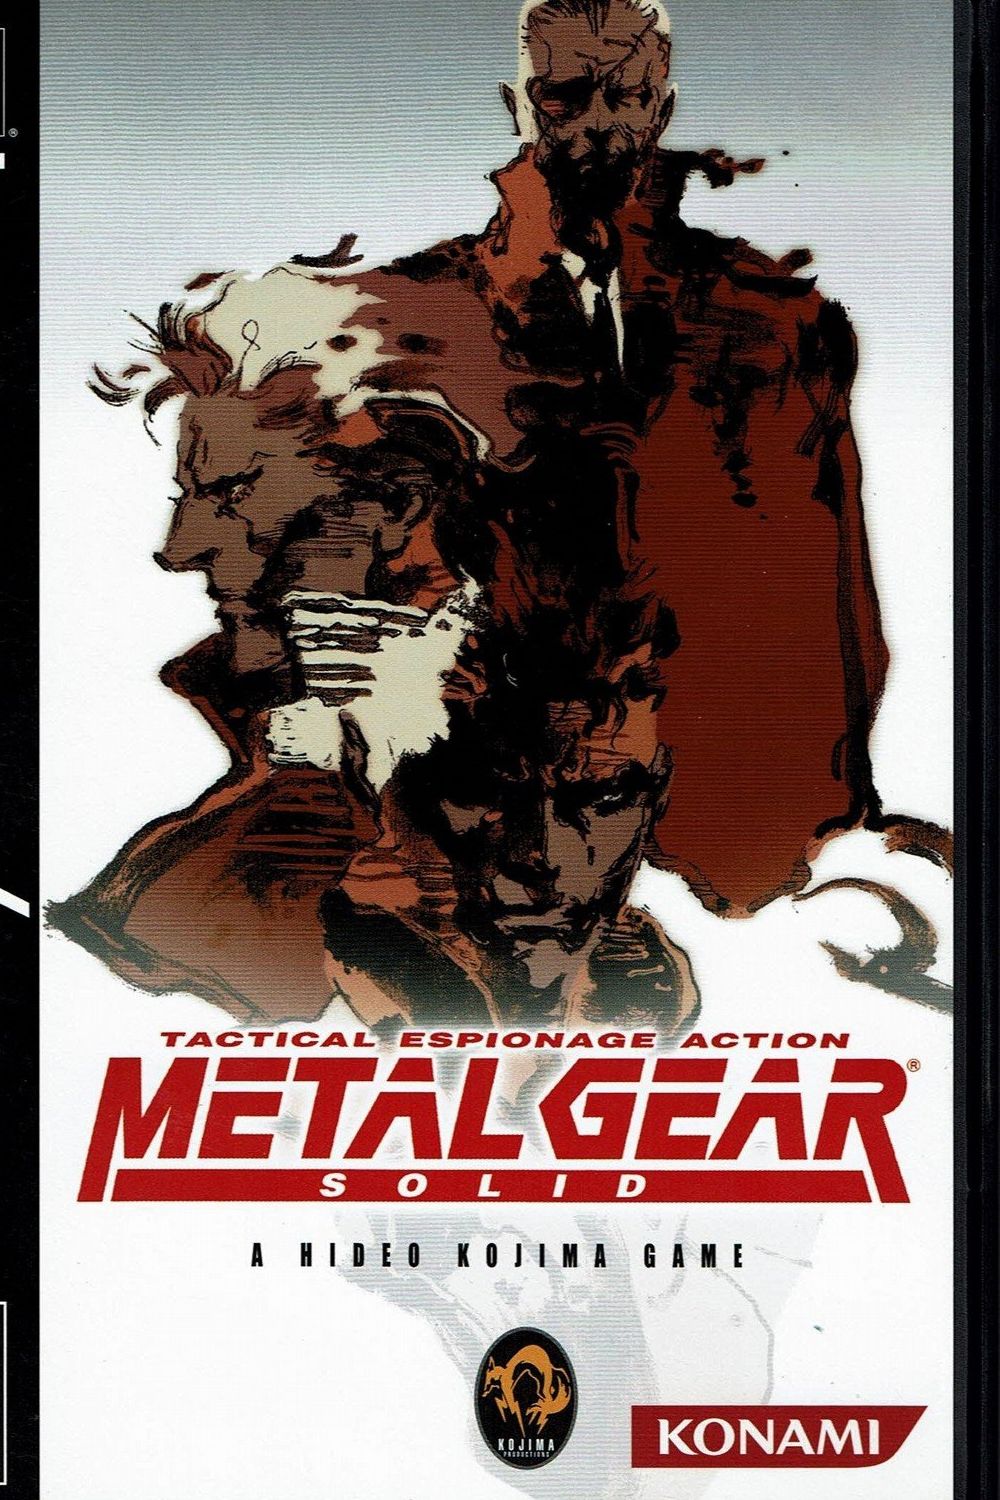 Rumor Claims Original Metal Gear Solid Is Getting a Remake